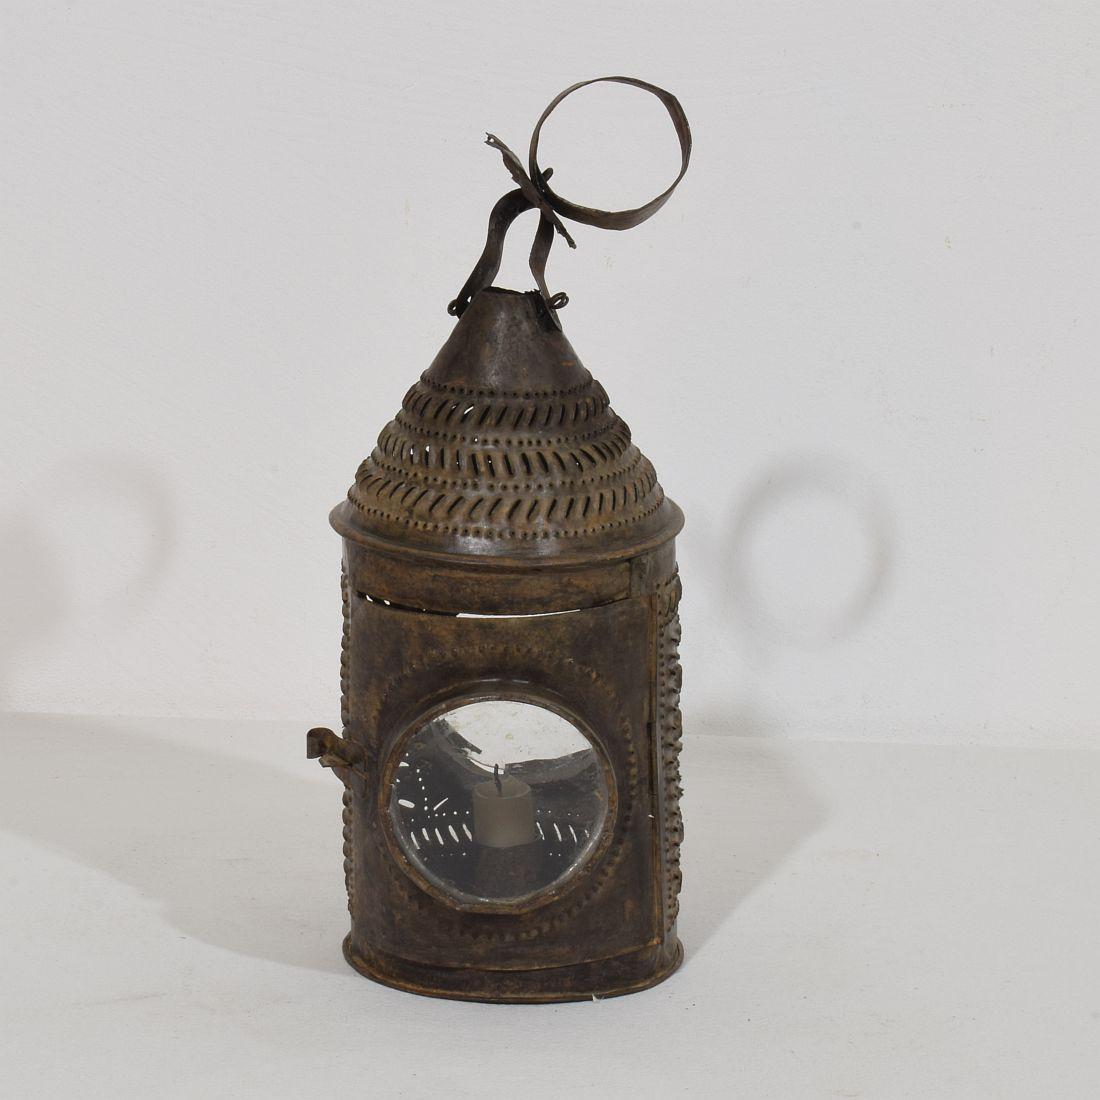 Beautiful and rare folk art rolled sheet iron pendant lantern with a great patina due to its high age.
The lantern has a cylindrical body with a conical pediment pierced with intricate decorative perforations.
The lantern has one small door and 2